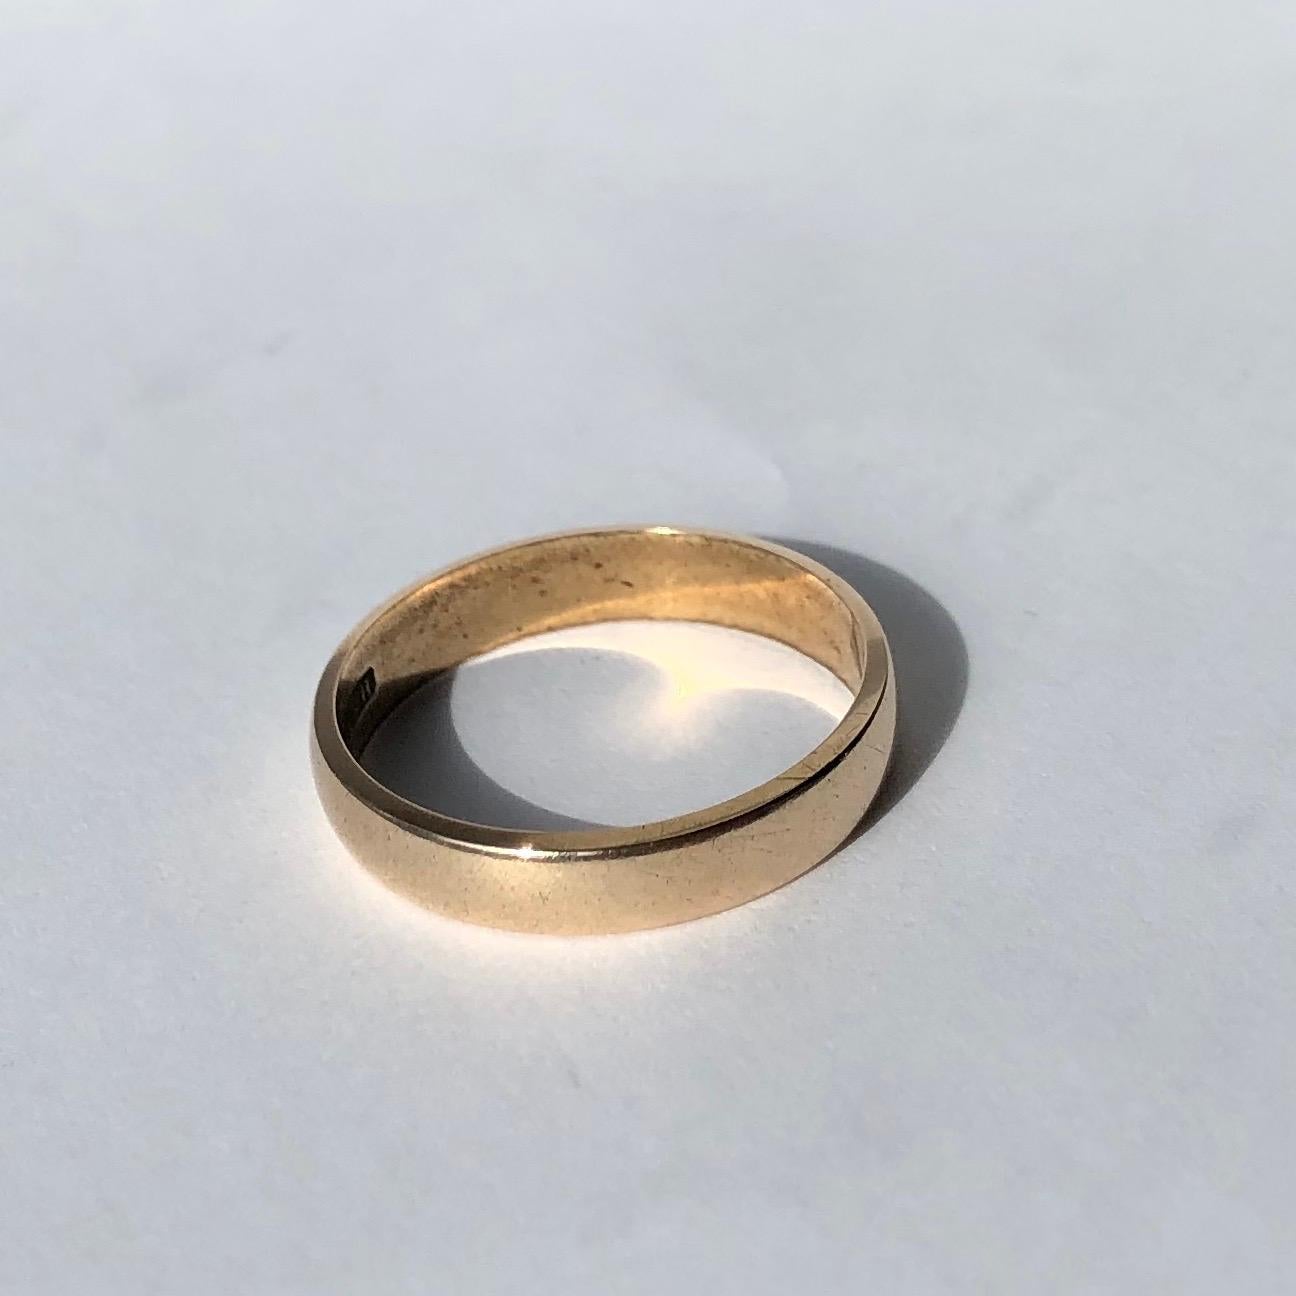 An 9ct gold band makes the perfectly classic wedding band or a great everyday wear piece. Made in Birmingham, England. 

Ring Size: P 1/2 or 7 3/4
Band Width: 4mm 

Weight: 2.59g